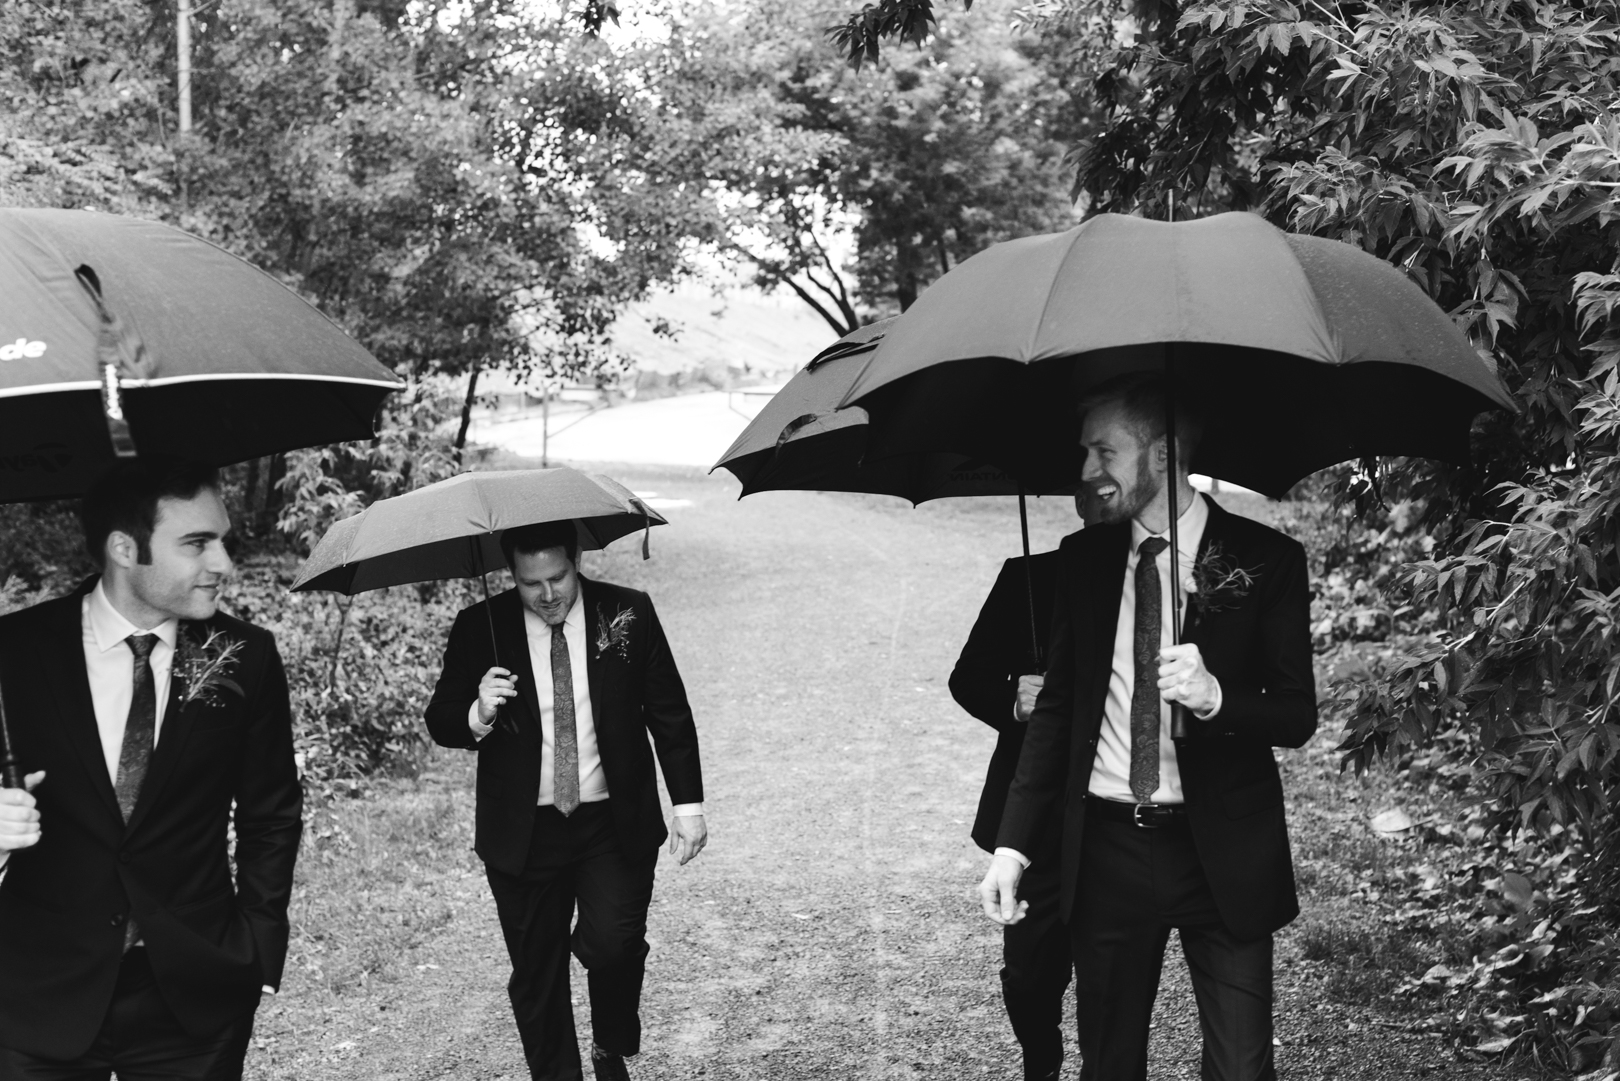 groom and groomsmen walking down a dirt path holding umbrellas in black and white